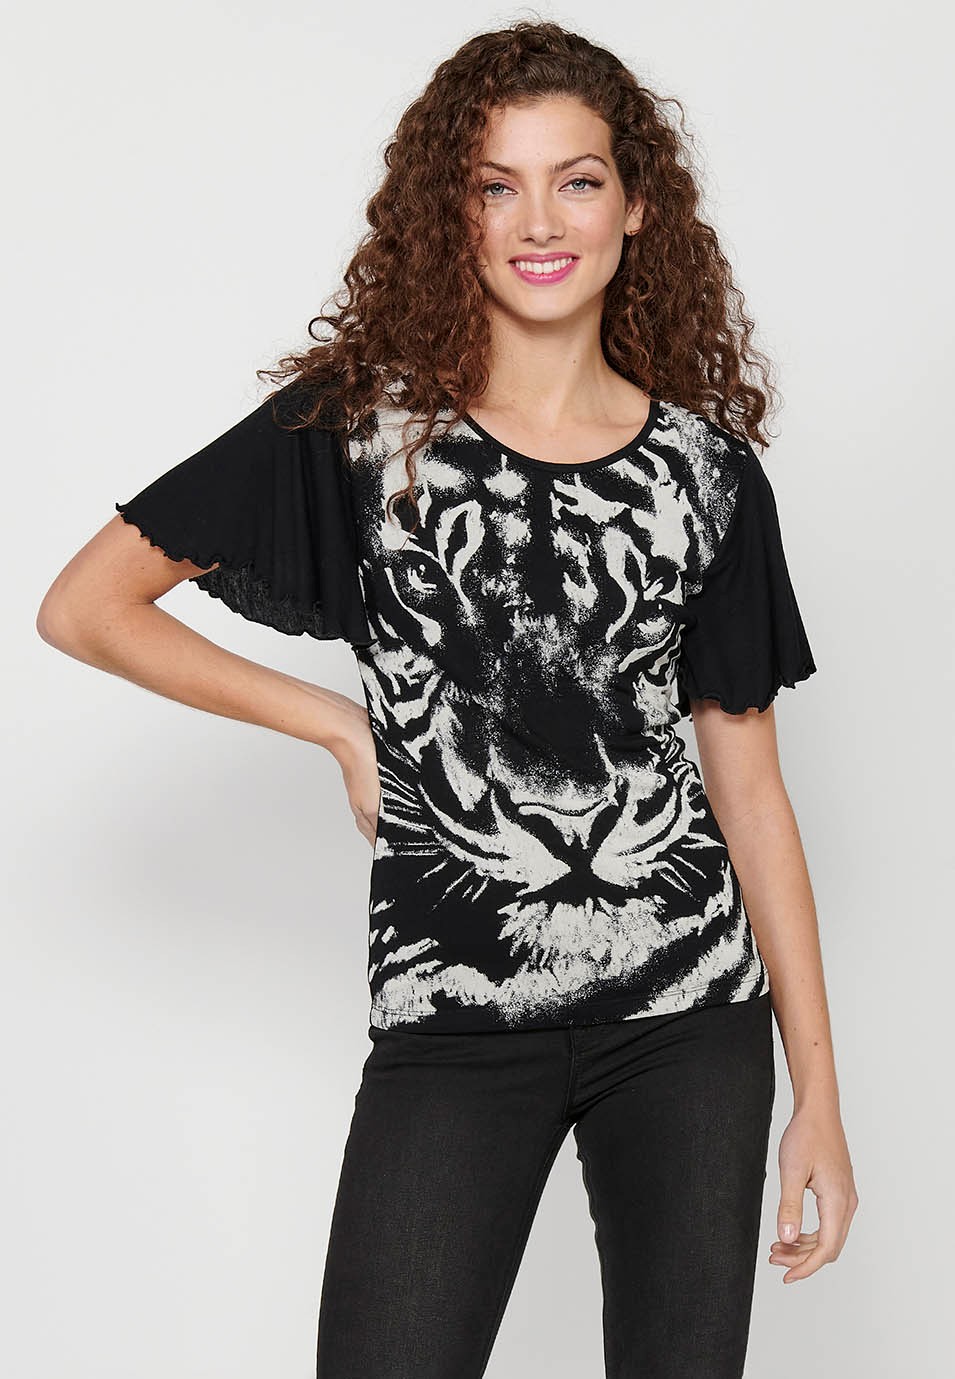 Black Top with Wide Sleeves and Front Print for Women